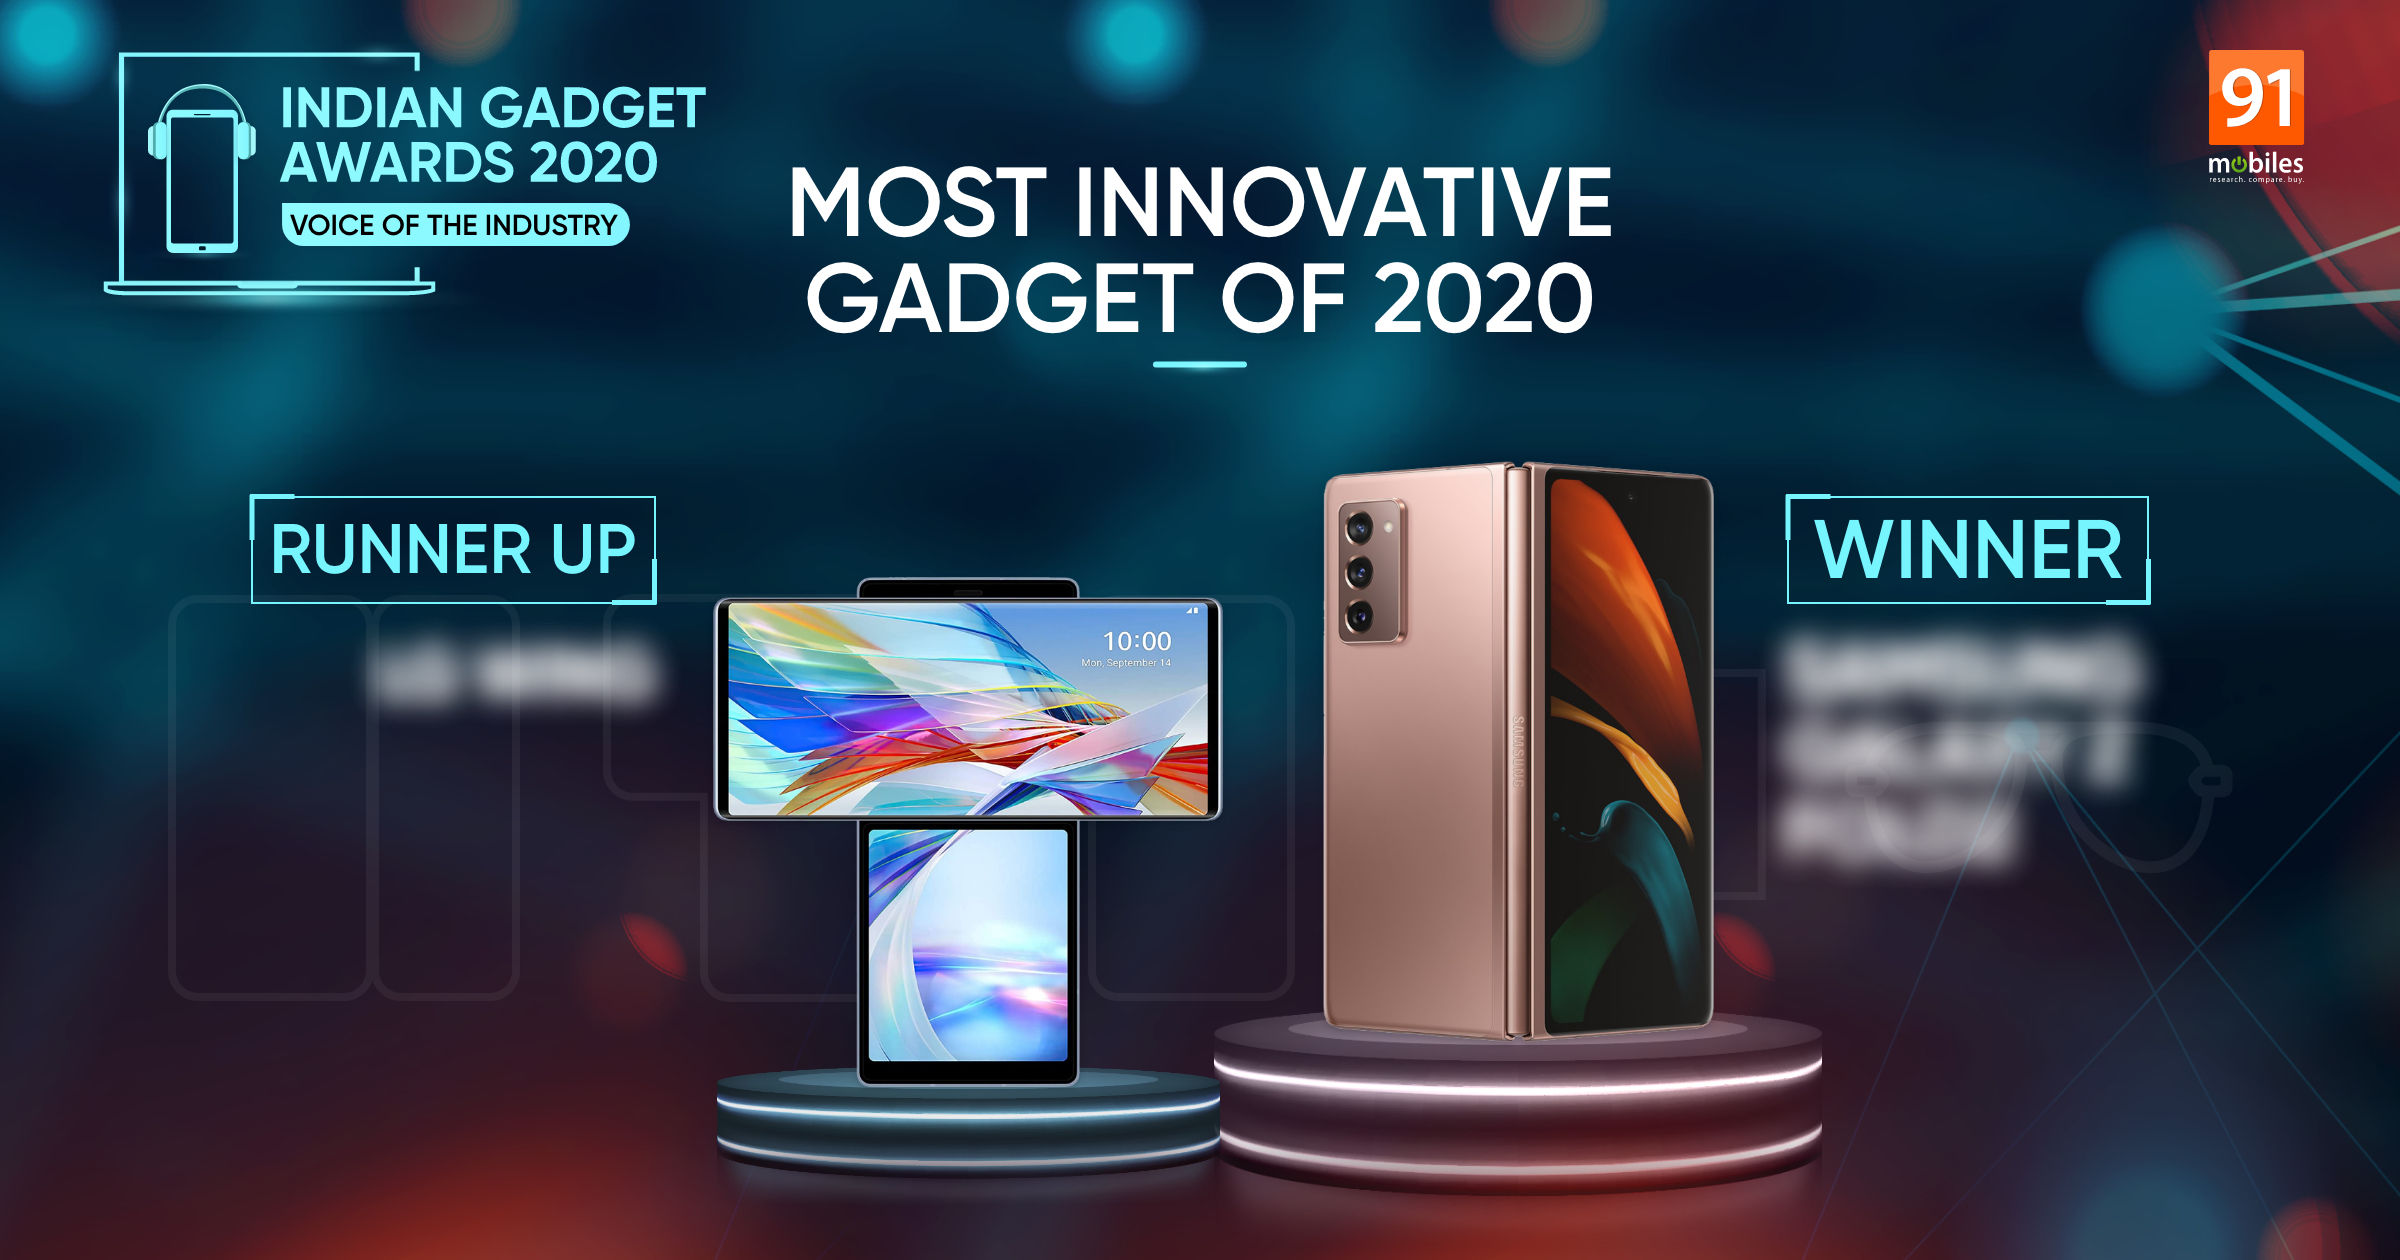 Indian Gadget Awards — Most Innovative Gadget of 2020: Galaxy Z Fold 2 or LG Wing?